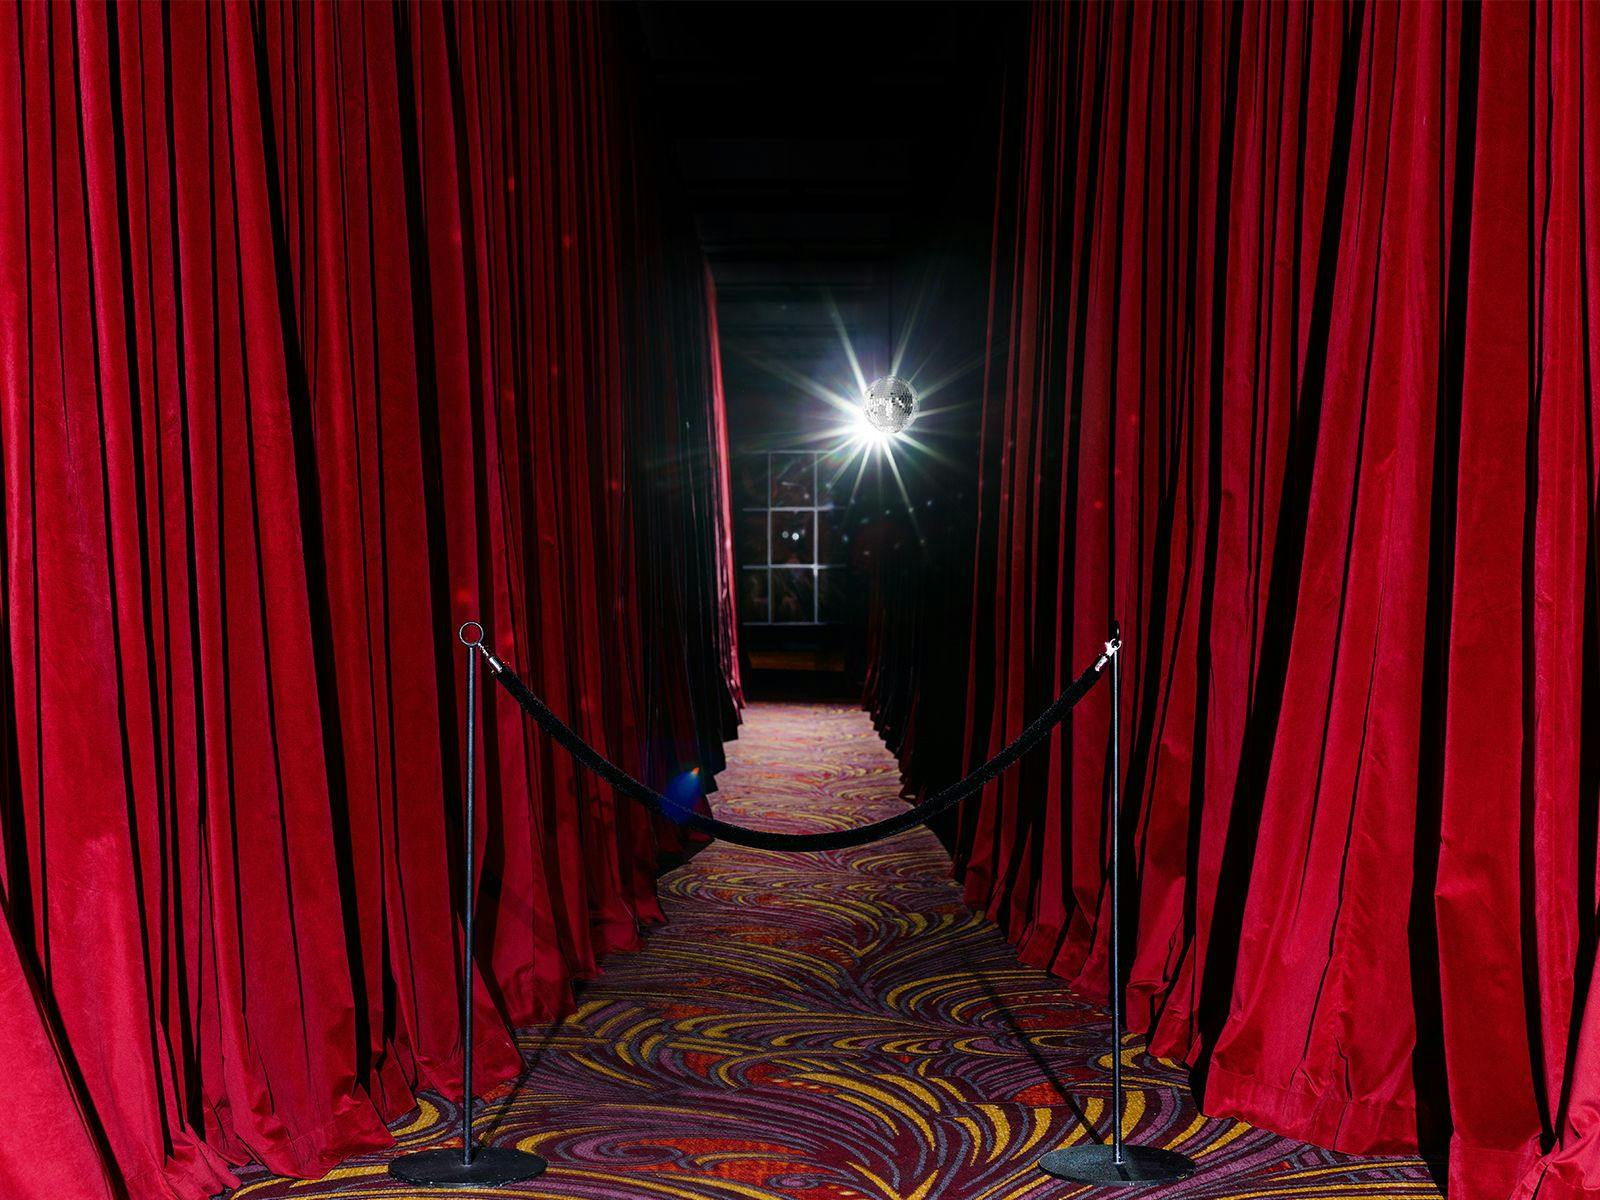 A creepy carpeted hallway, lined by long red velvet curtains.